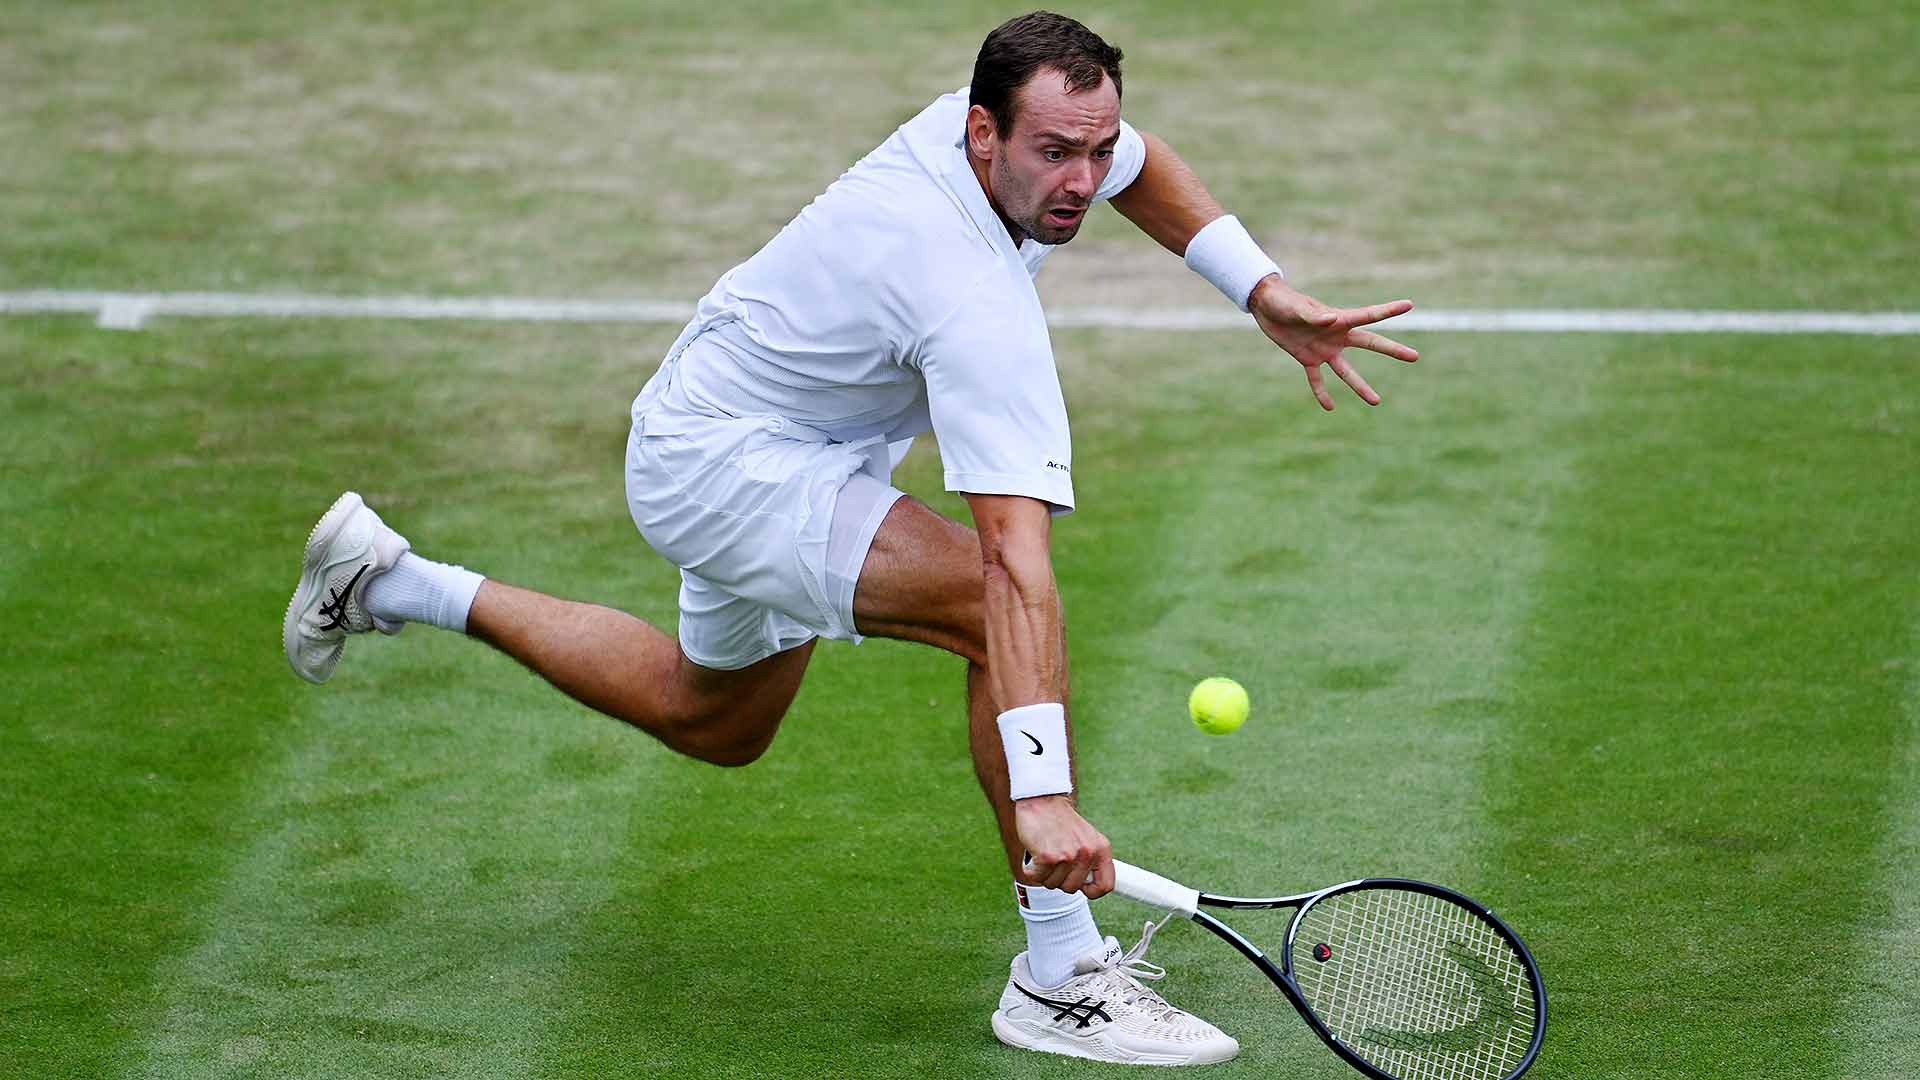 Roman Safiullin is through to the quarter-finals in his Wimbledon debut.